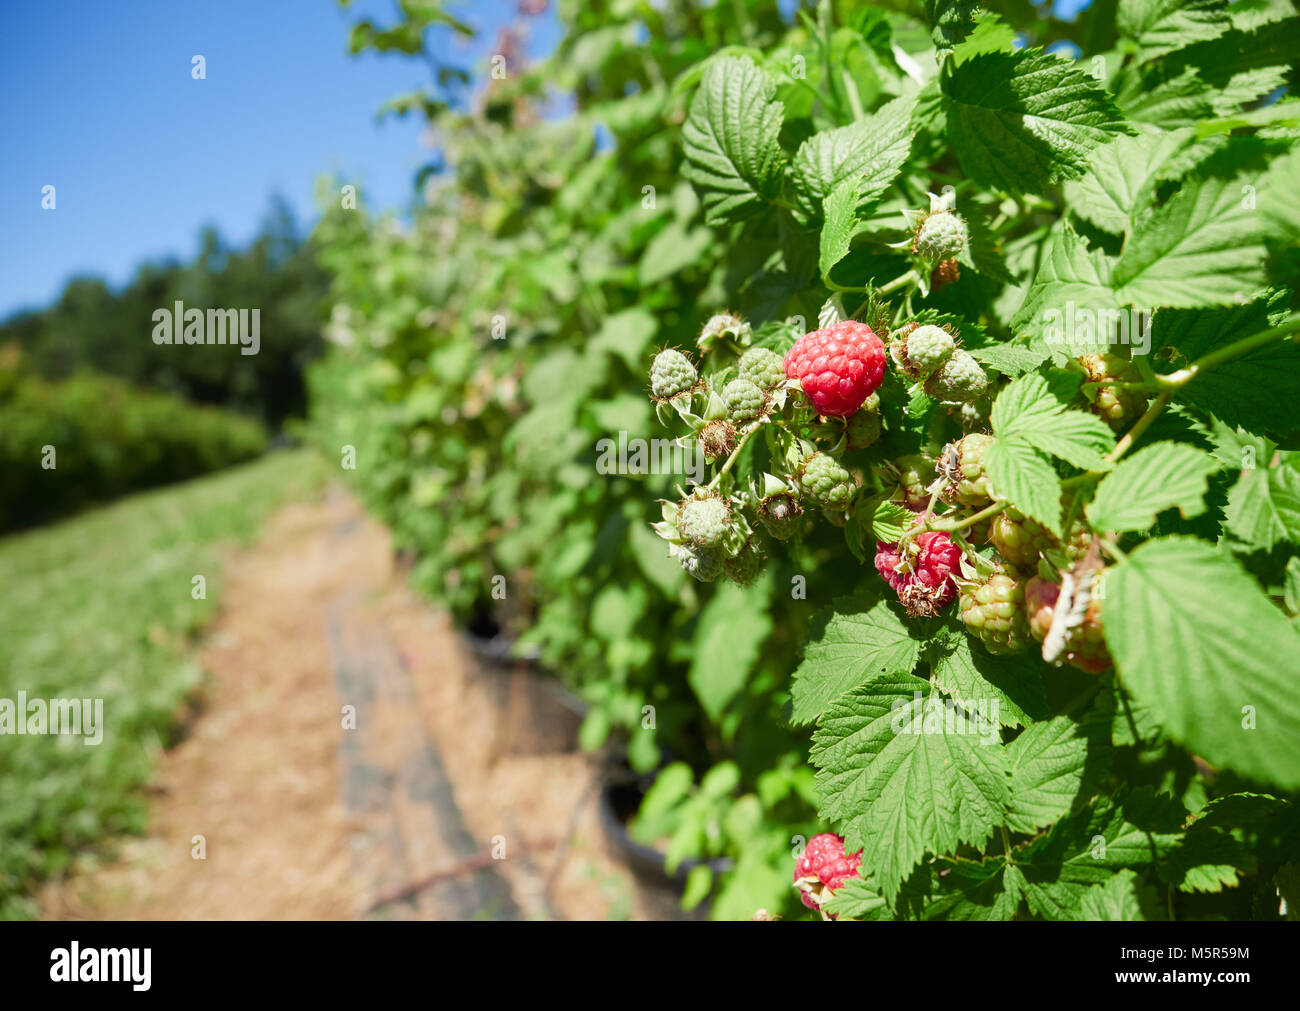 Raspberries growing on raspberry canes in a pick your own fruit farm in the English countryside, UK. Stock Photo